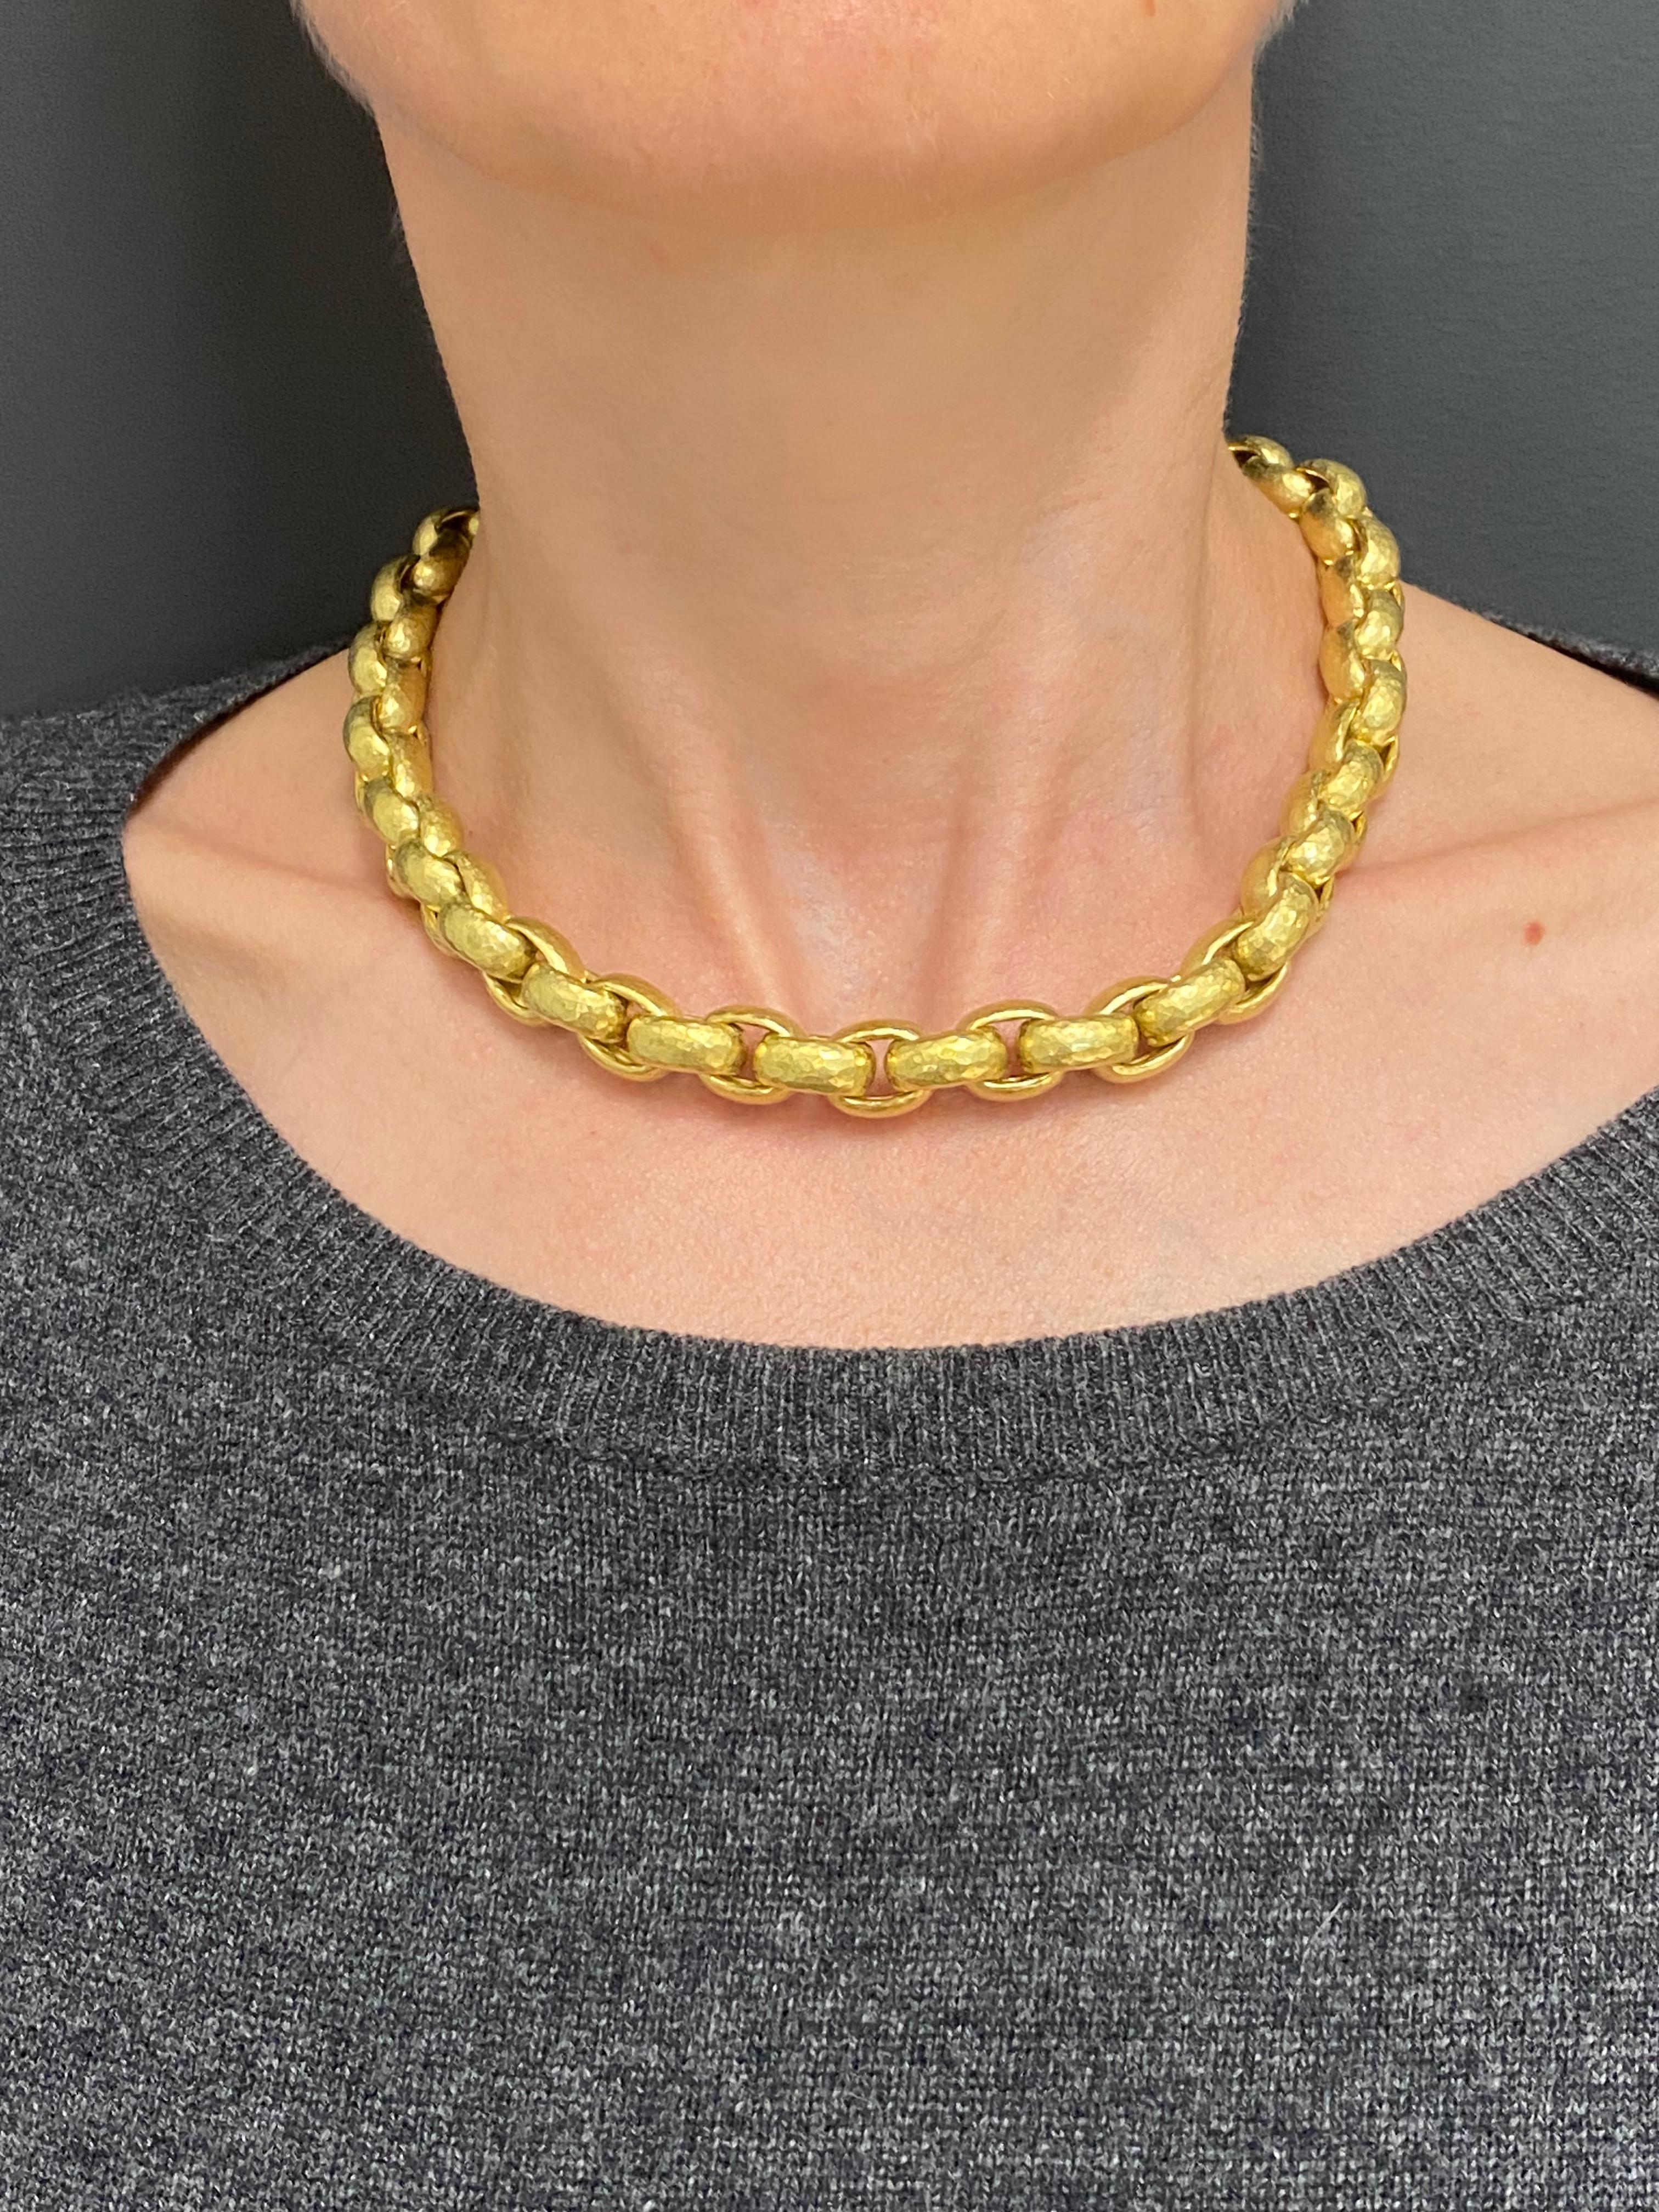 DESIGNER: Paloma Picasso for Tiffany & Co.
CIRCA: 1989
MATERIALS: 18K Yellow Gold
WEIGHT: 110.3 grams
MEASUREMENT: 18